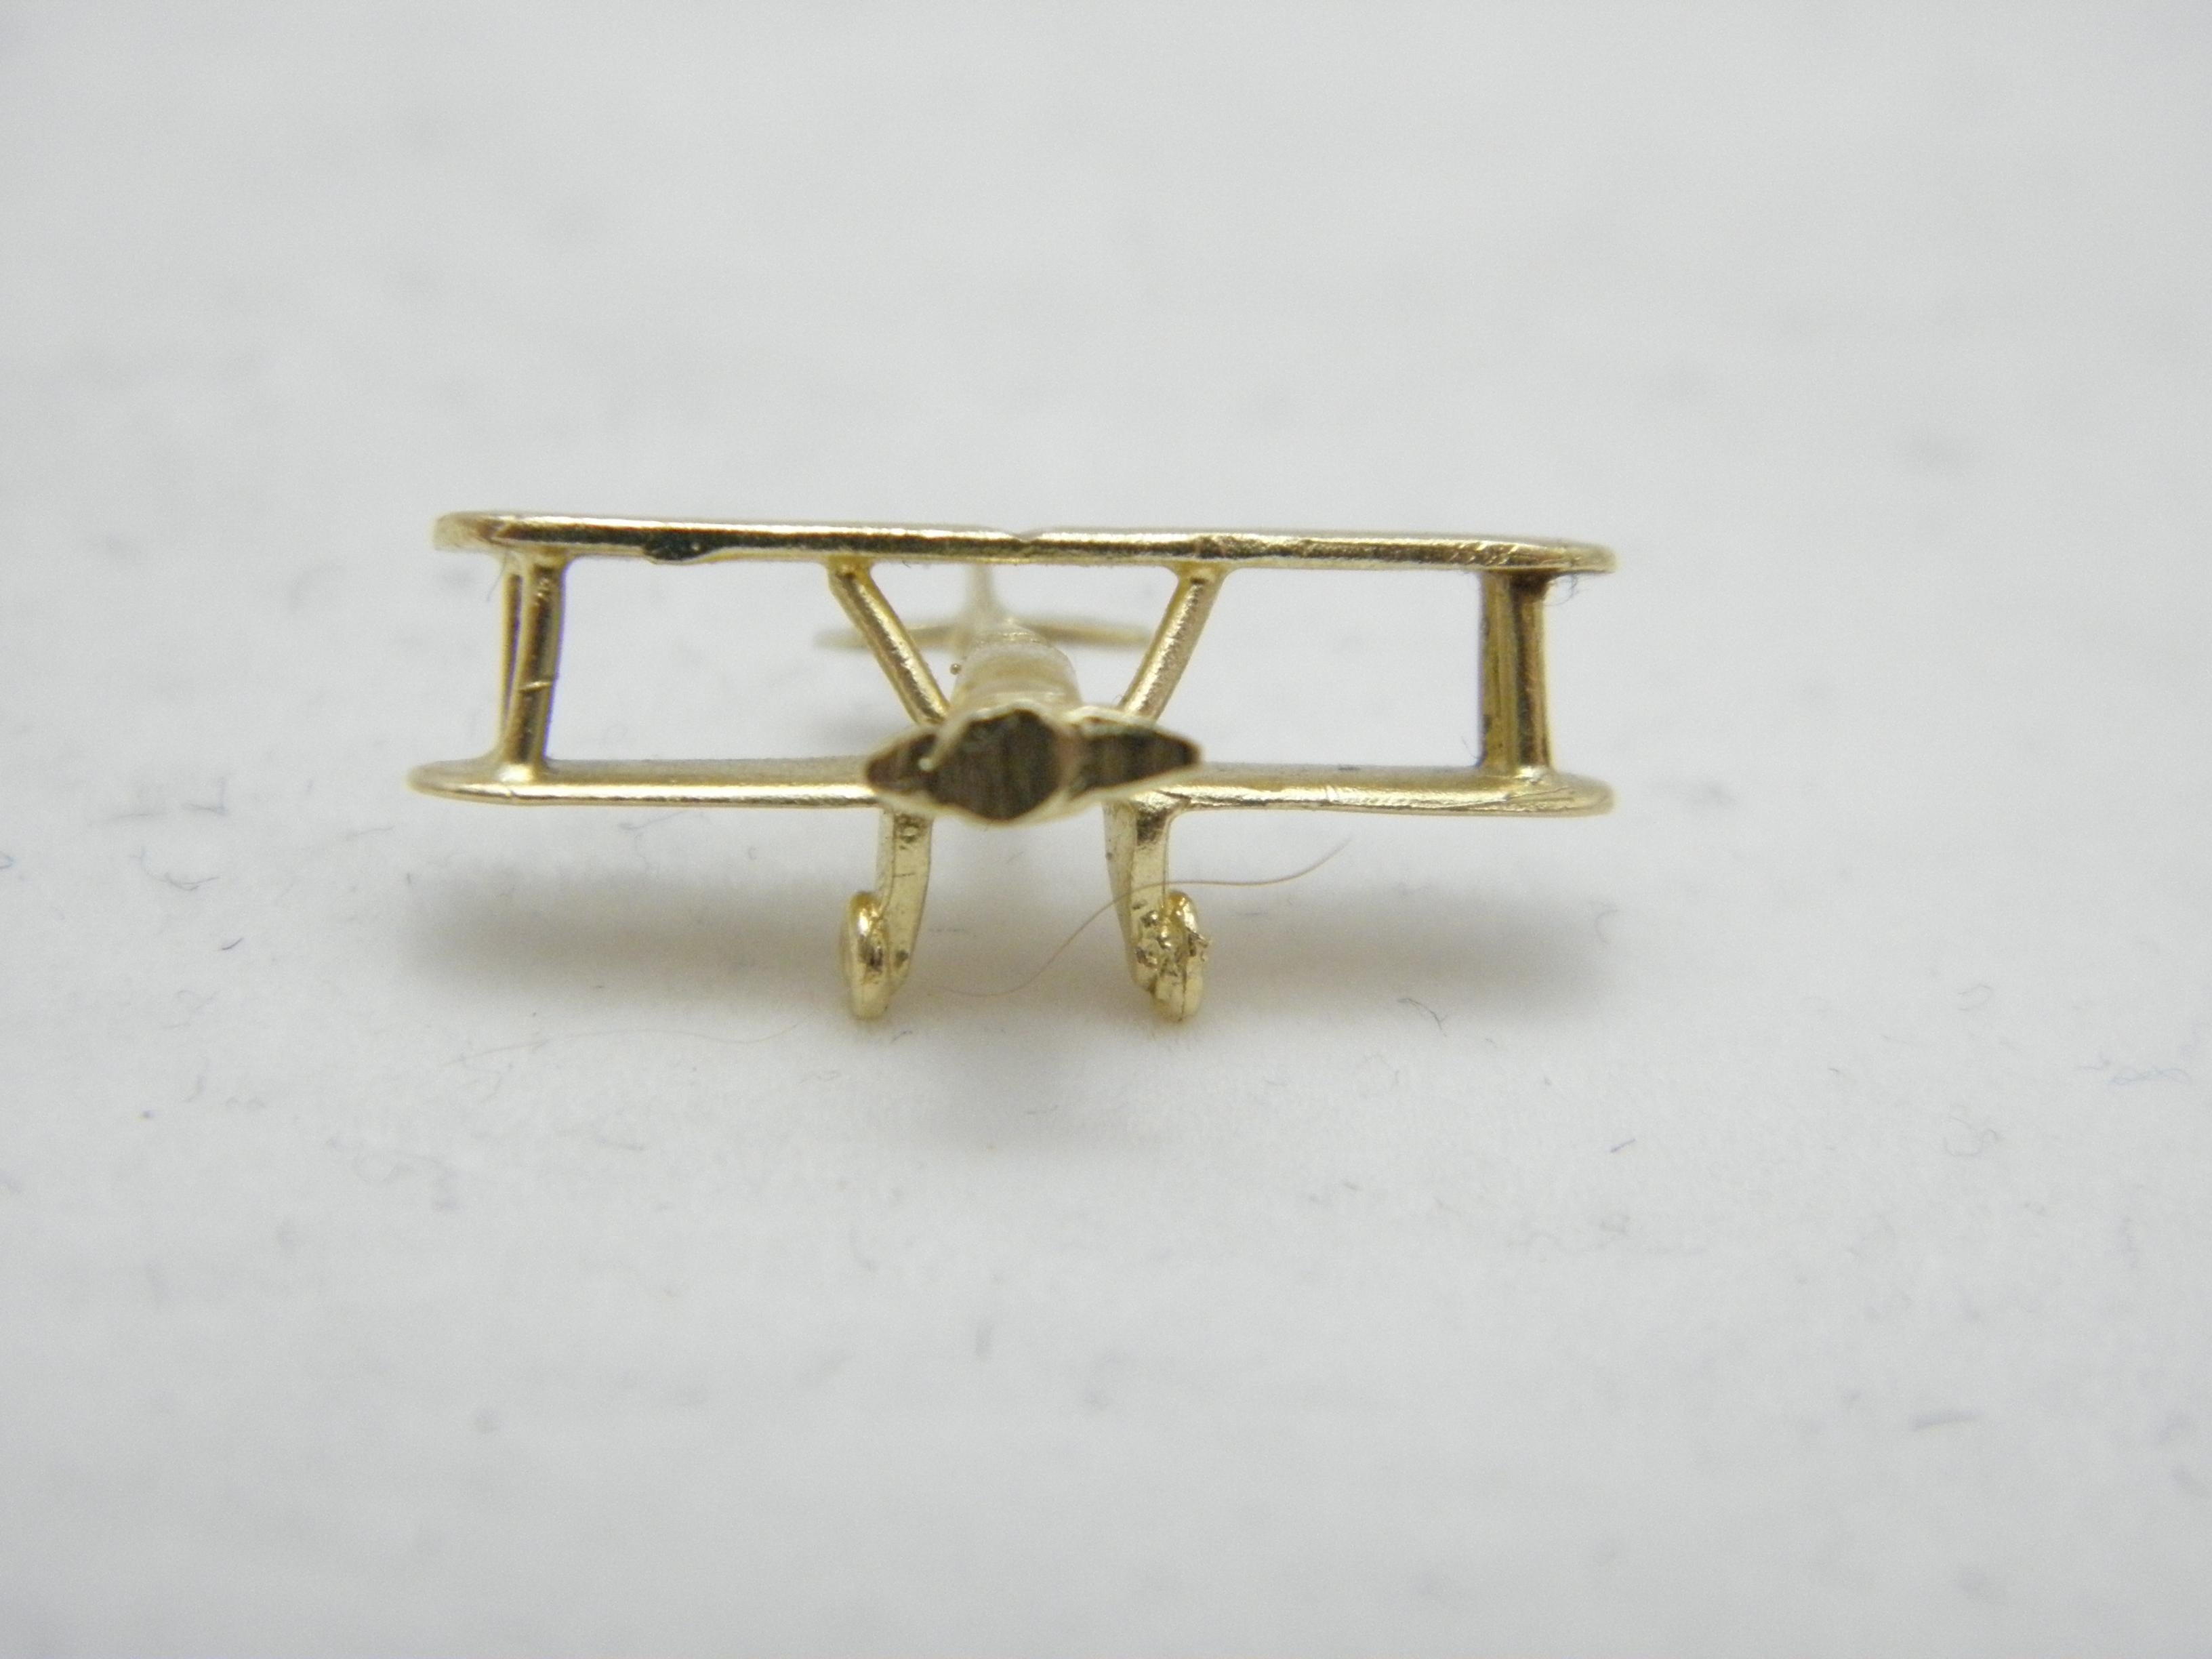 Vintage 14ct Gold Biplane Aeroplane Model Charm Fob c1970s 585 Purity Heavy For Sale 3